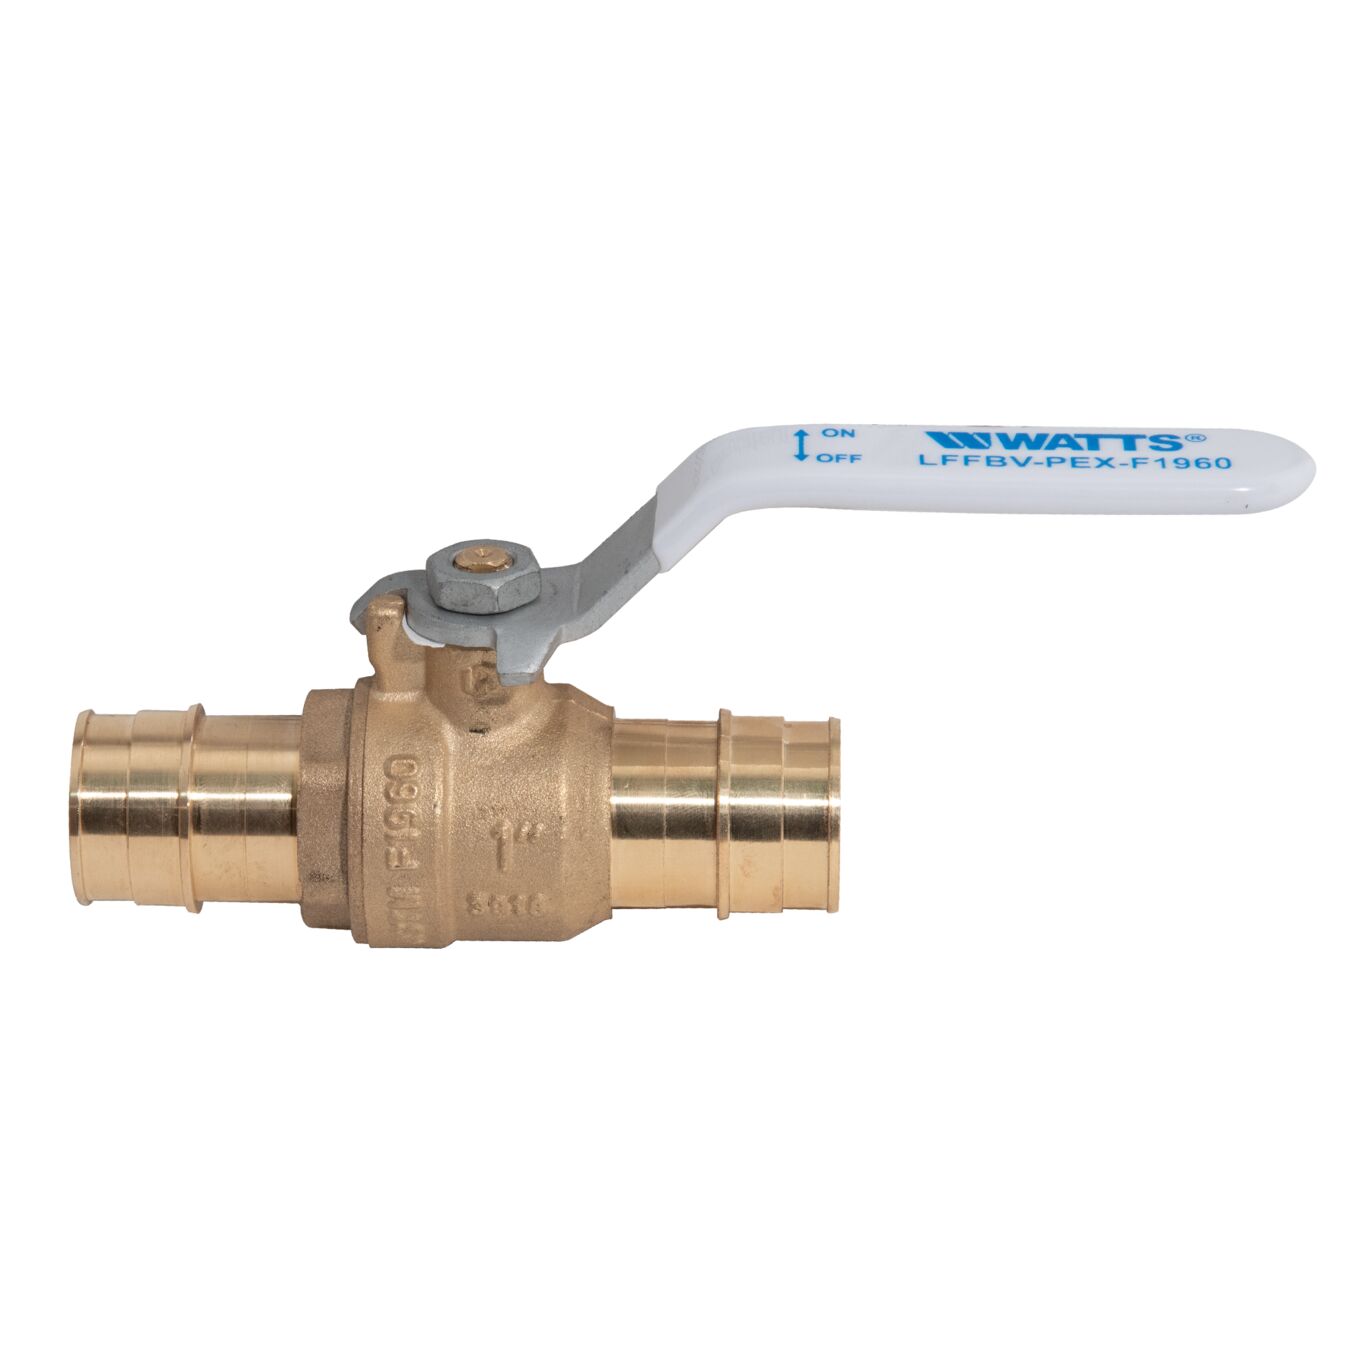 Expansion F1960 x 1" FNPT Lead-Free Brass Ball Valve for PEX-A 1" ProPEX 